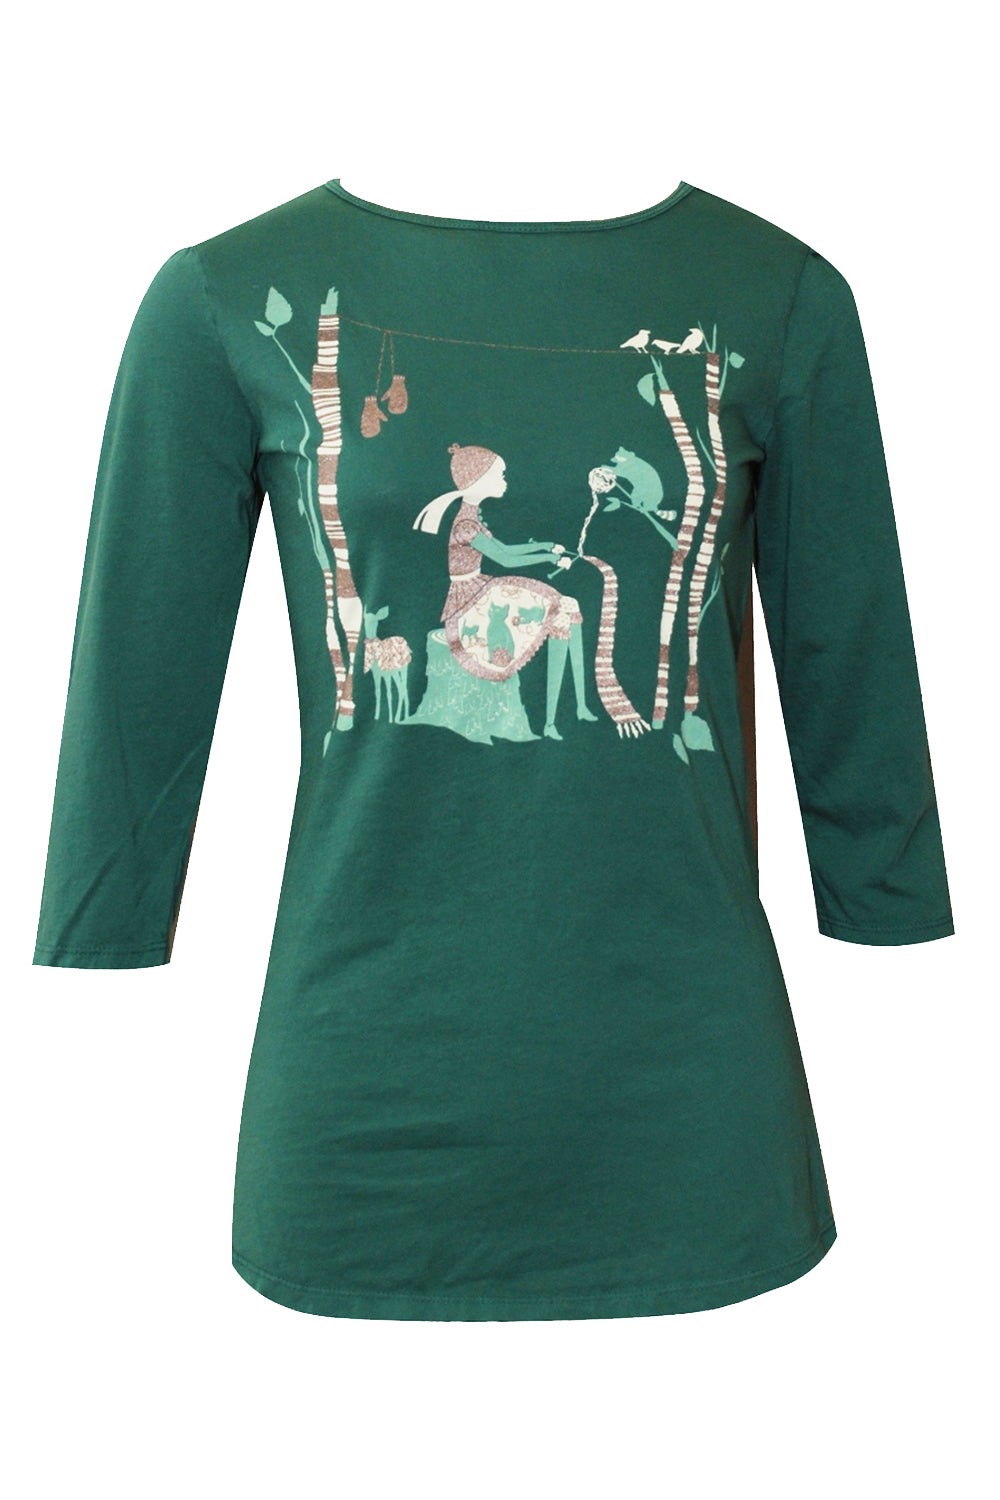 Knitting Pretty with Kitties in Pine- XS, S only!